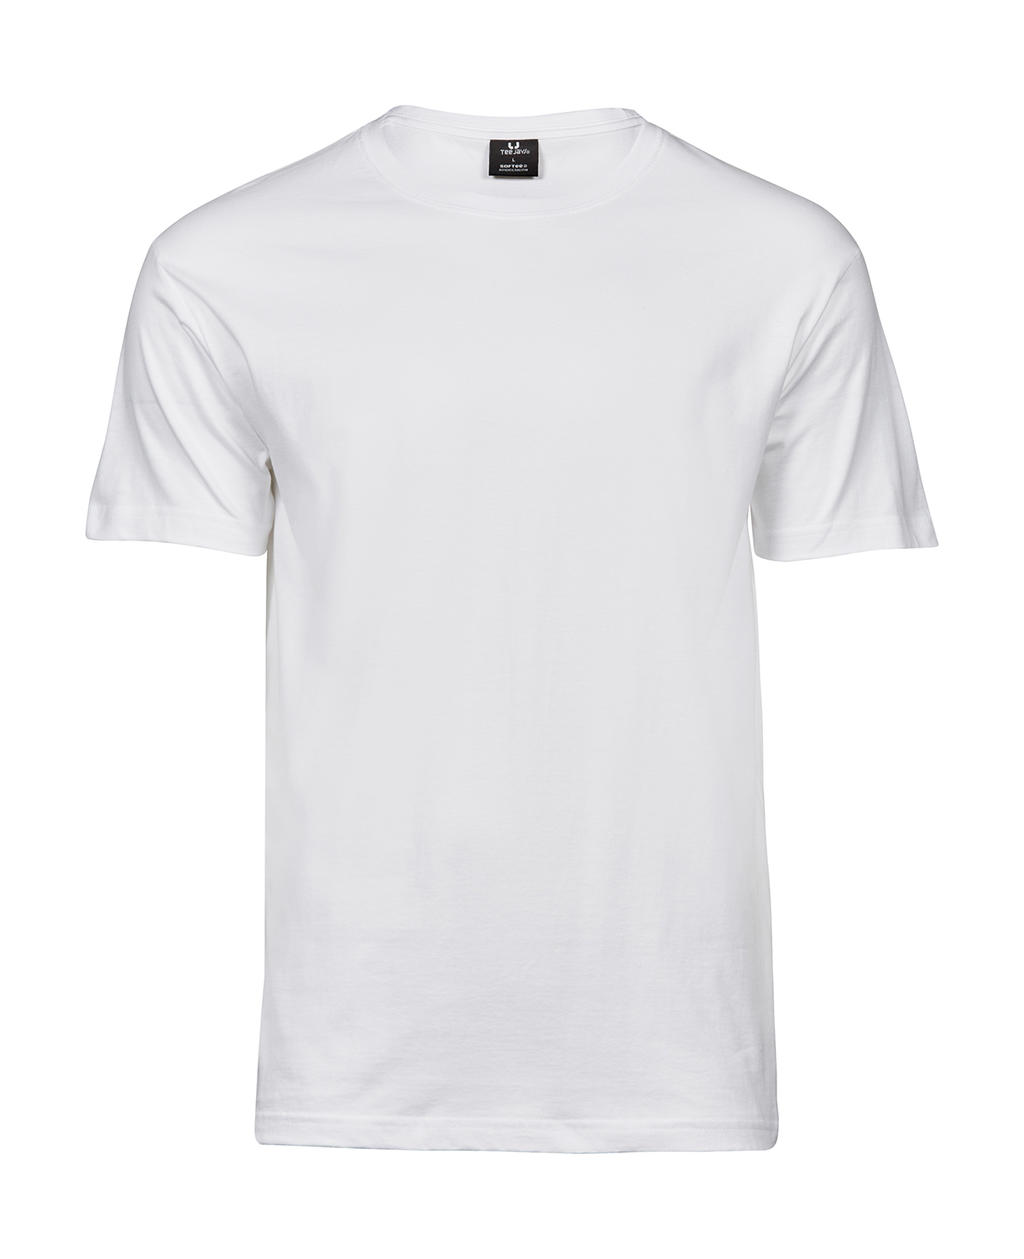  Sof Tee in Farbe White